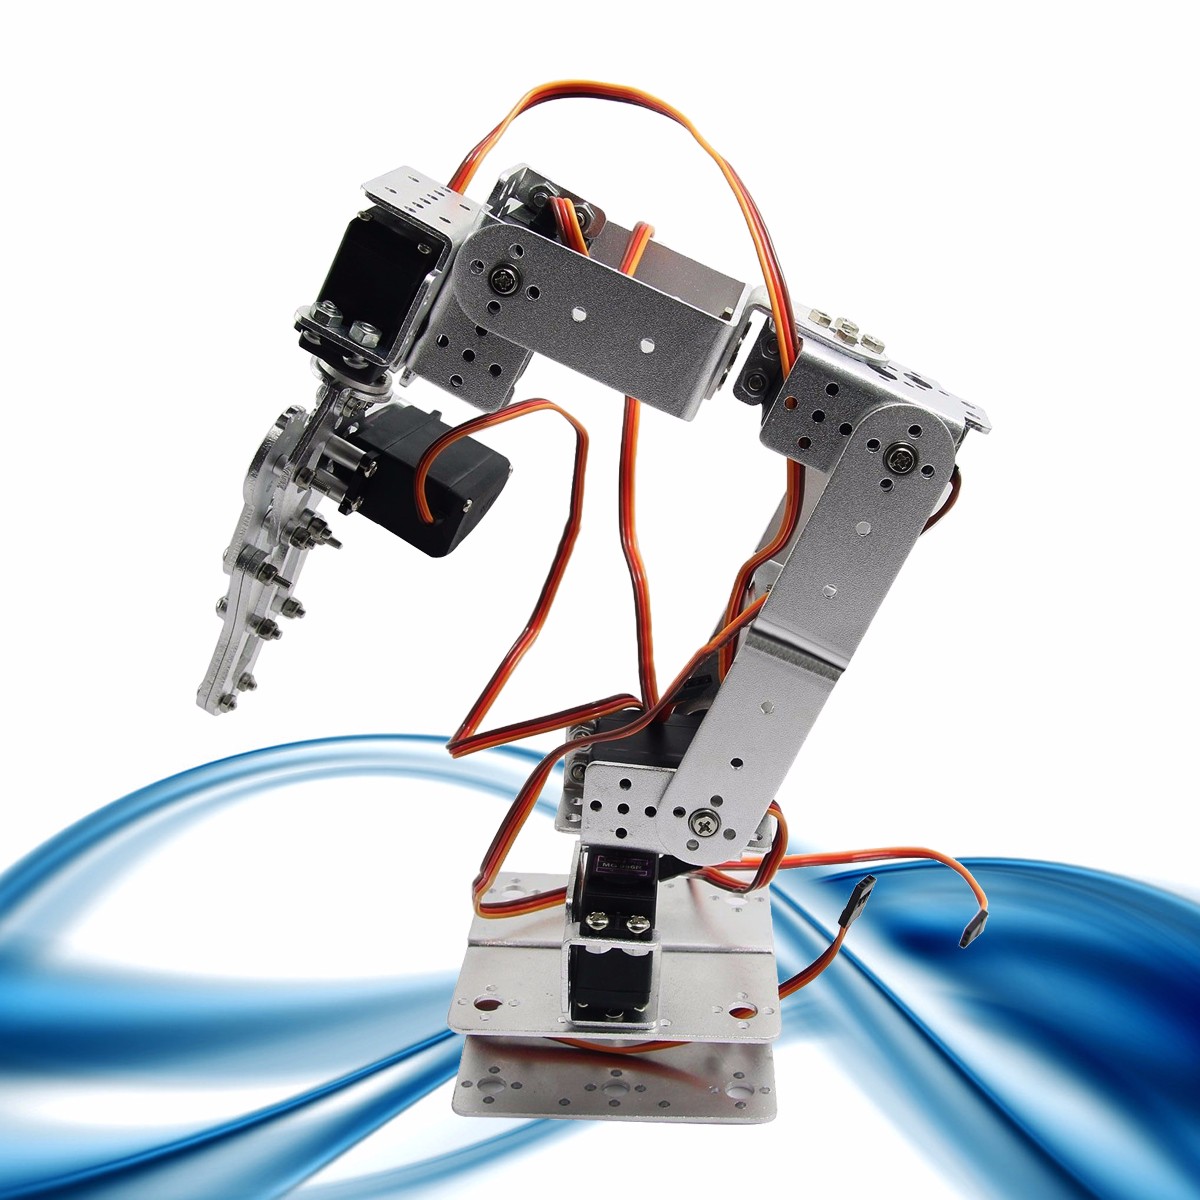 ROT2U 6DOF Aluminium Robot Arm Clamp Claw Mount Kit With Servos For Arduino-Silver 21